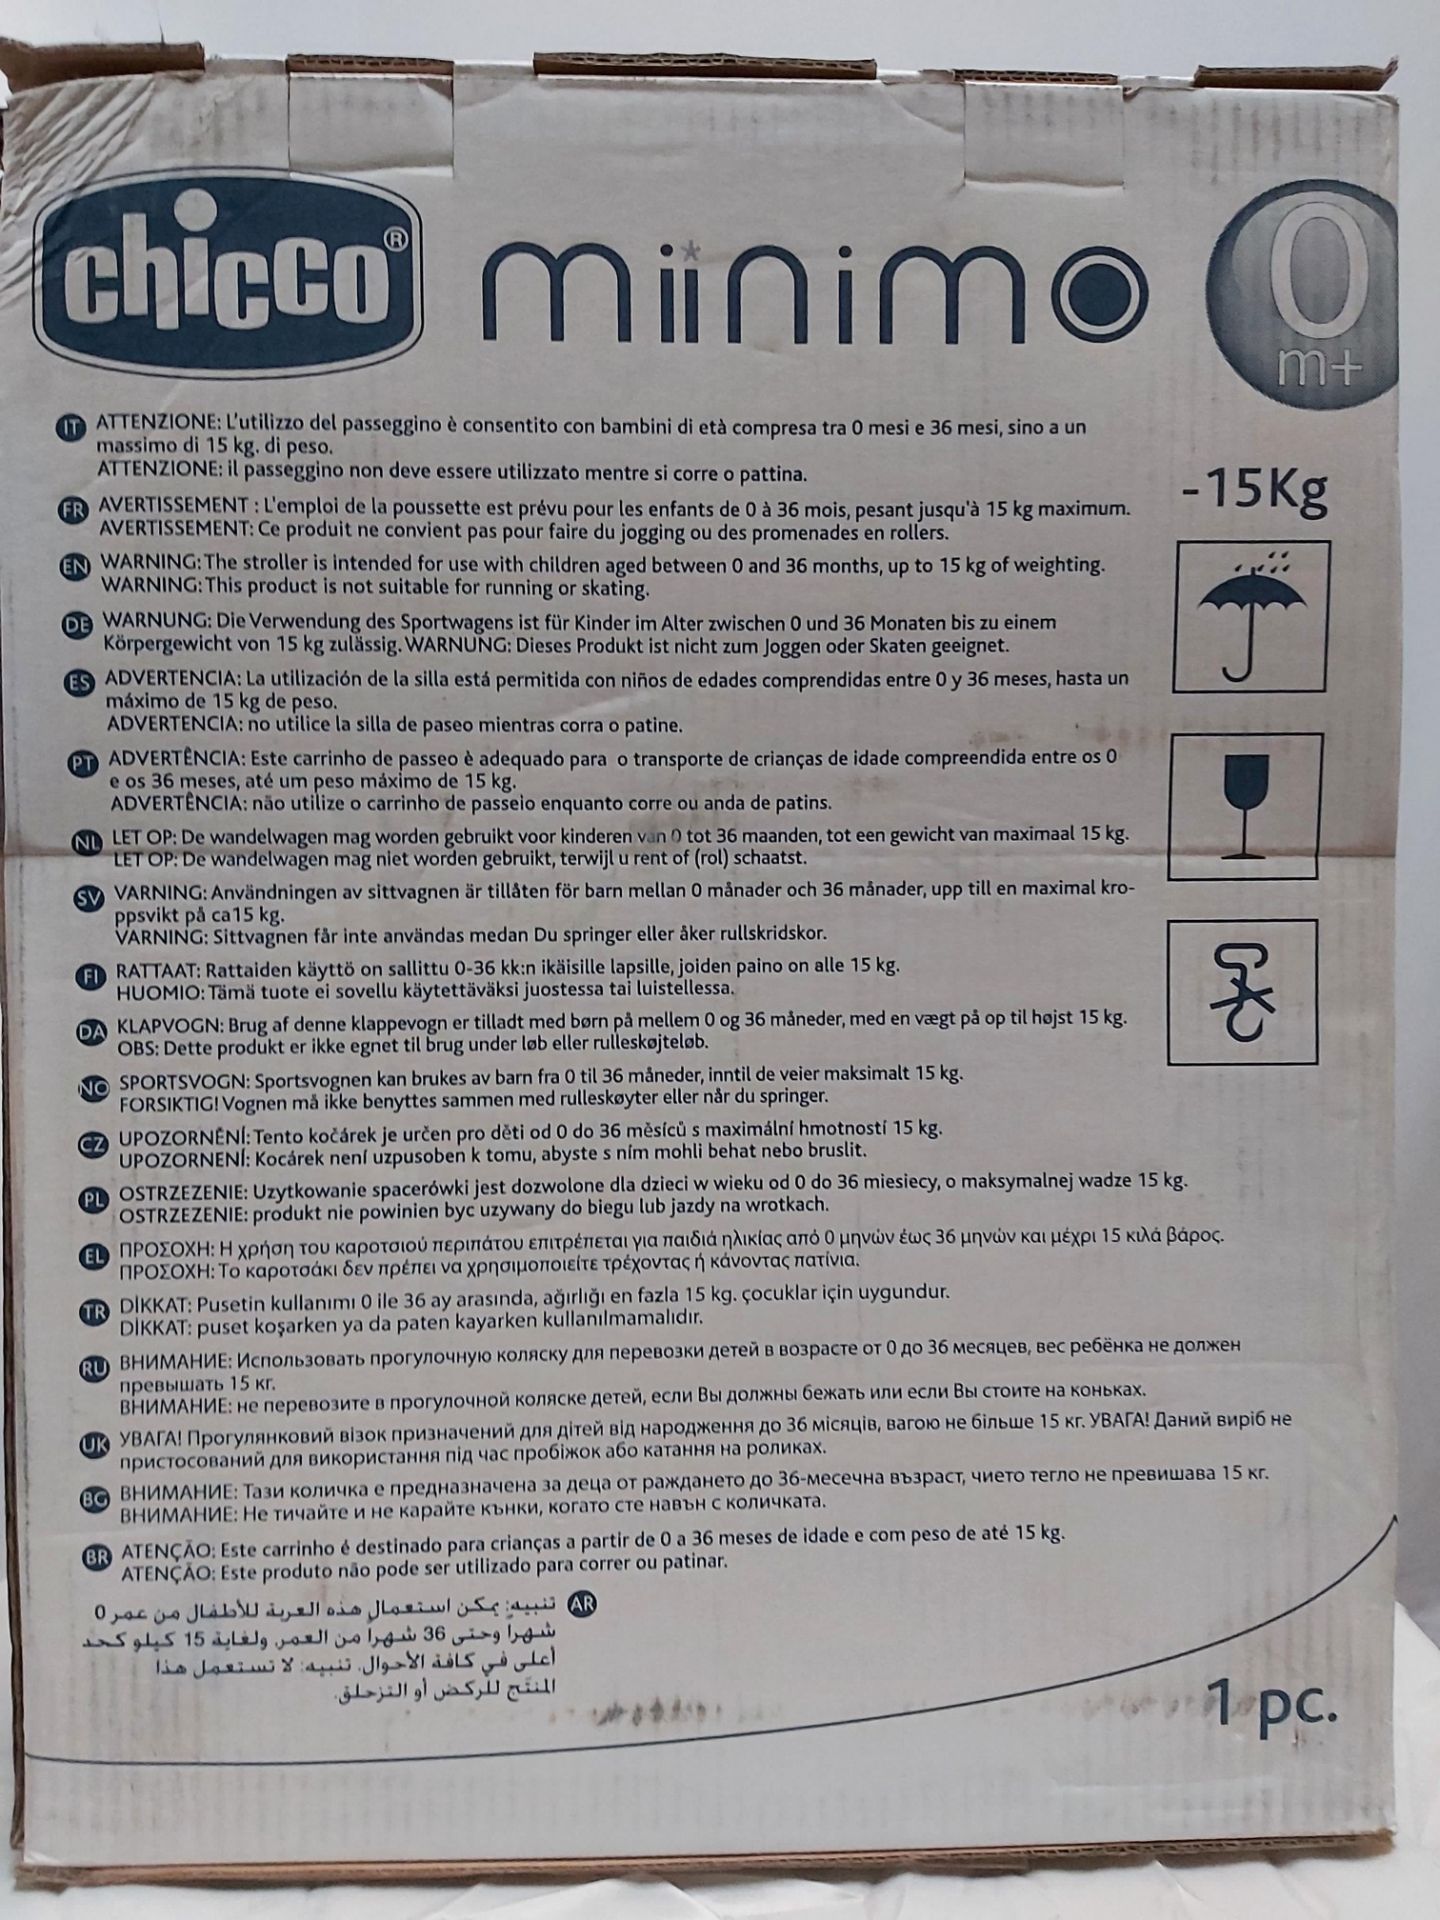 5 x Chicco Miinimo Silver/Grey Folding Stroller. Condition New & Sealed. (RRP £550) - Image 4 of 4